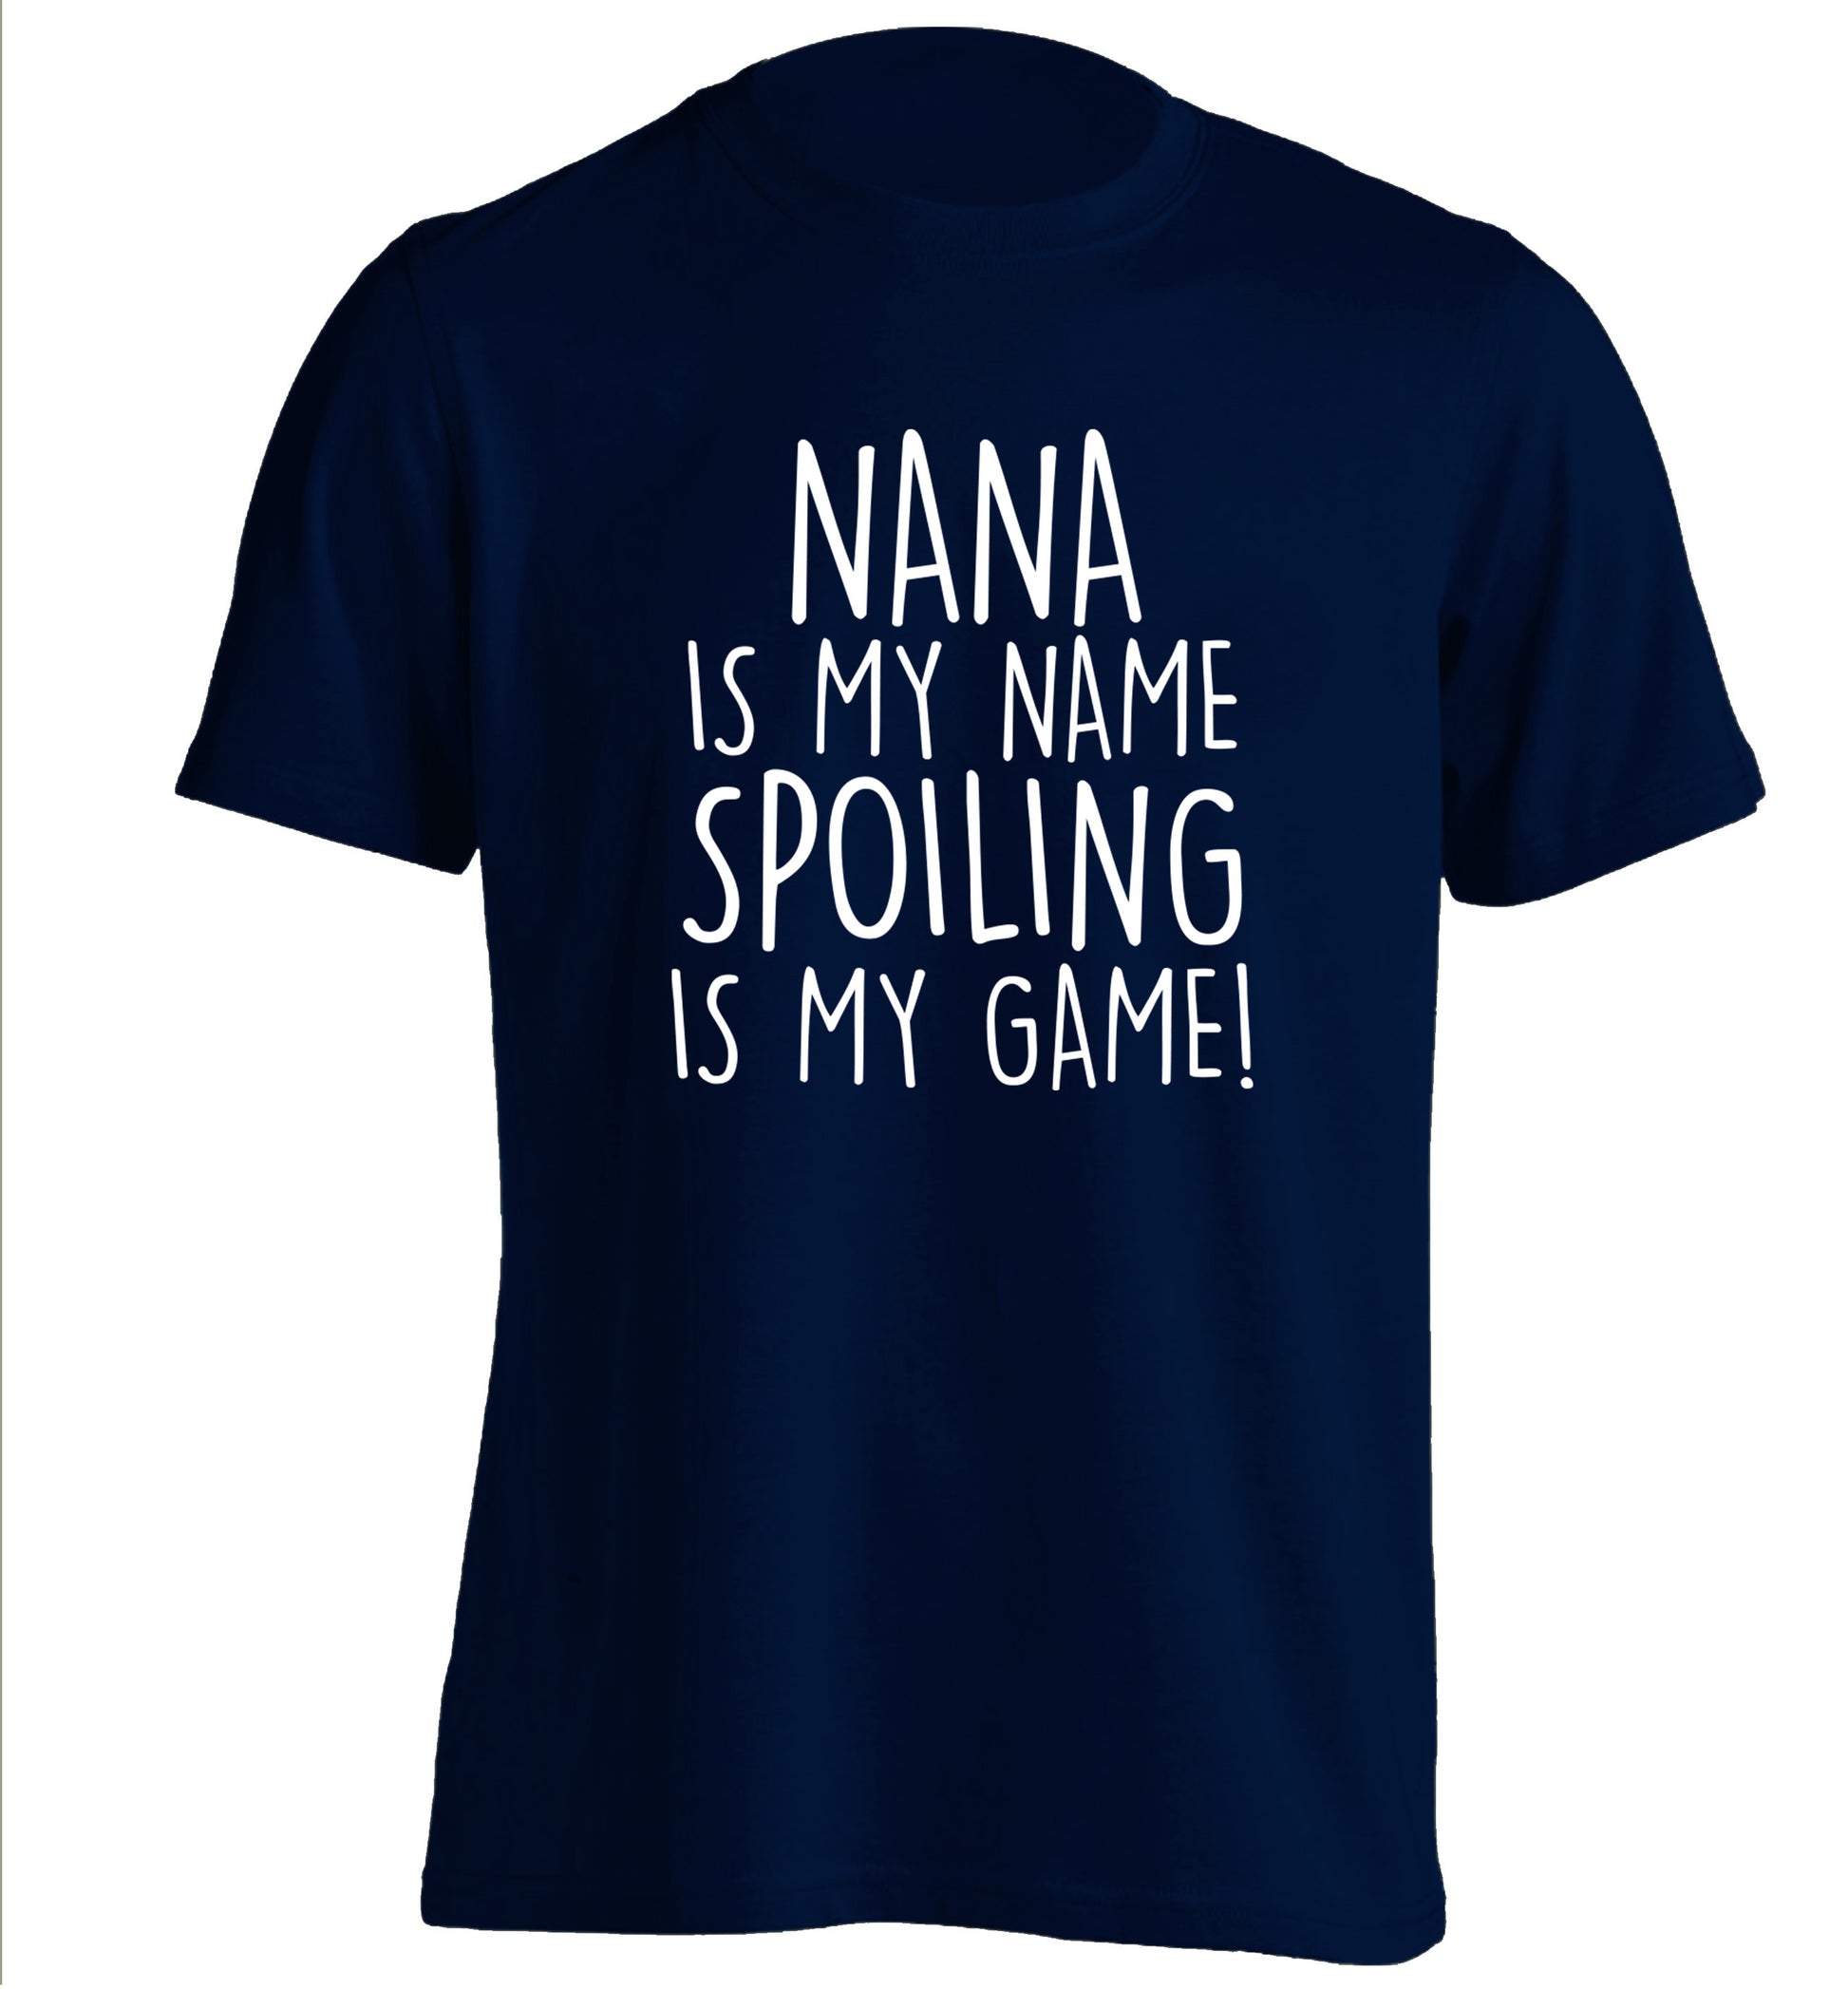 Nana is my name, spoiling is my game adults unisex navy Tshirt 2XL